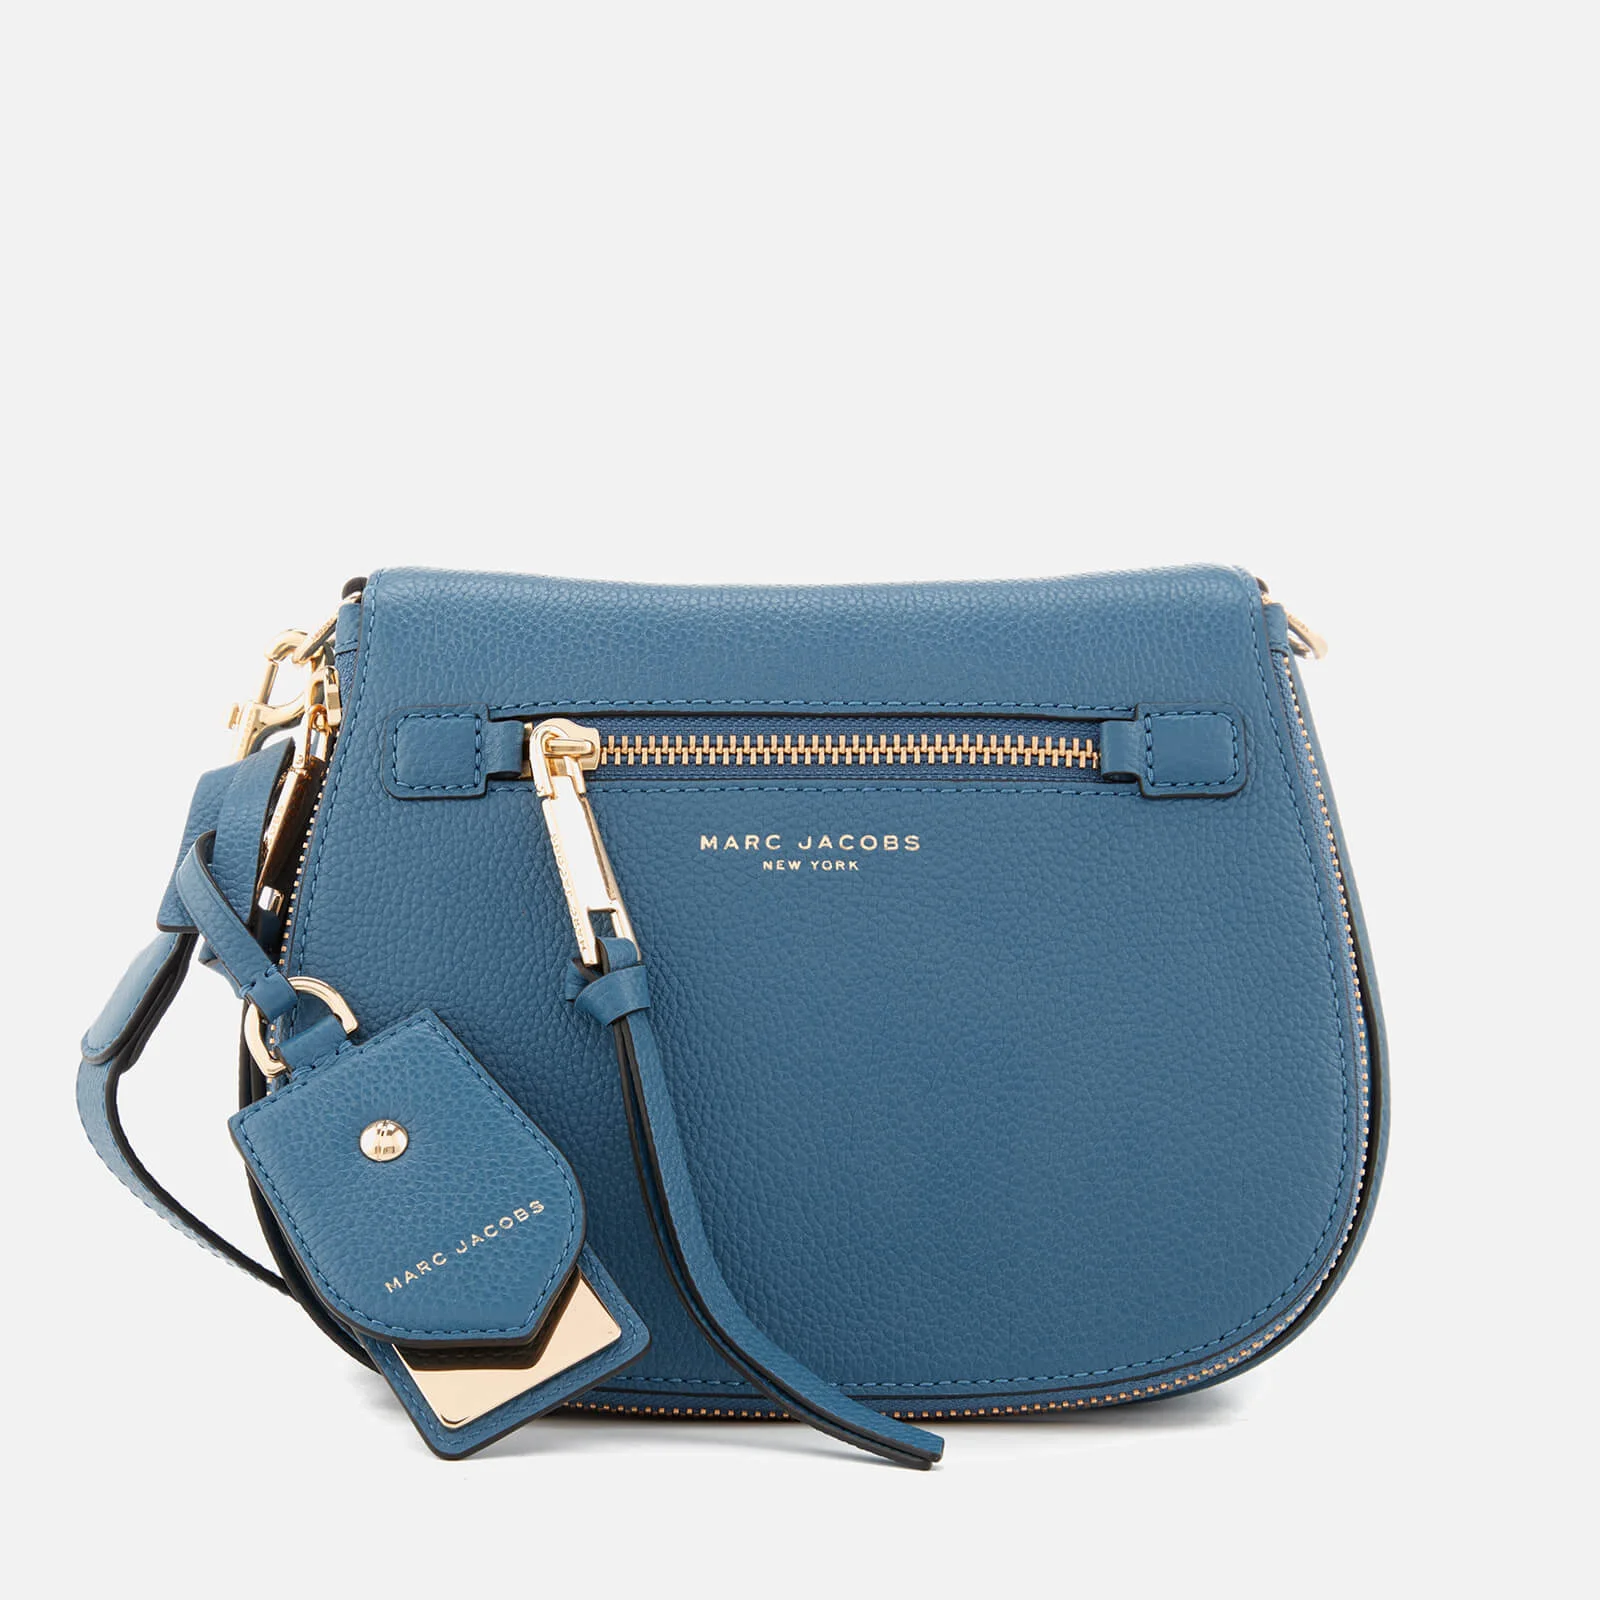 Marc Jacobs Women's Small Nomad Cross Body Bag - Vintage Blue Image 1